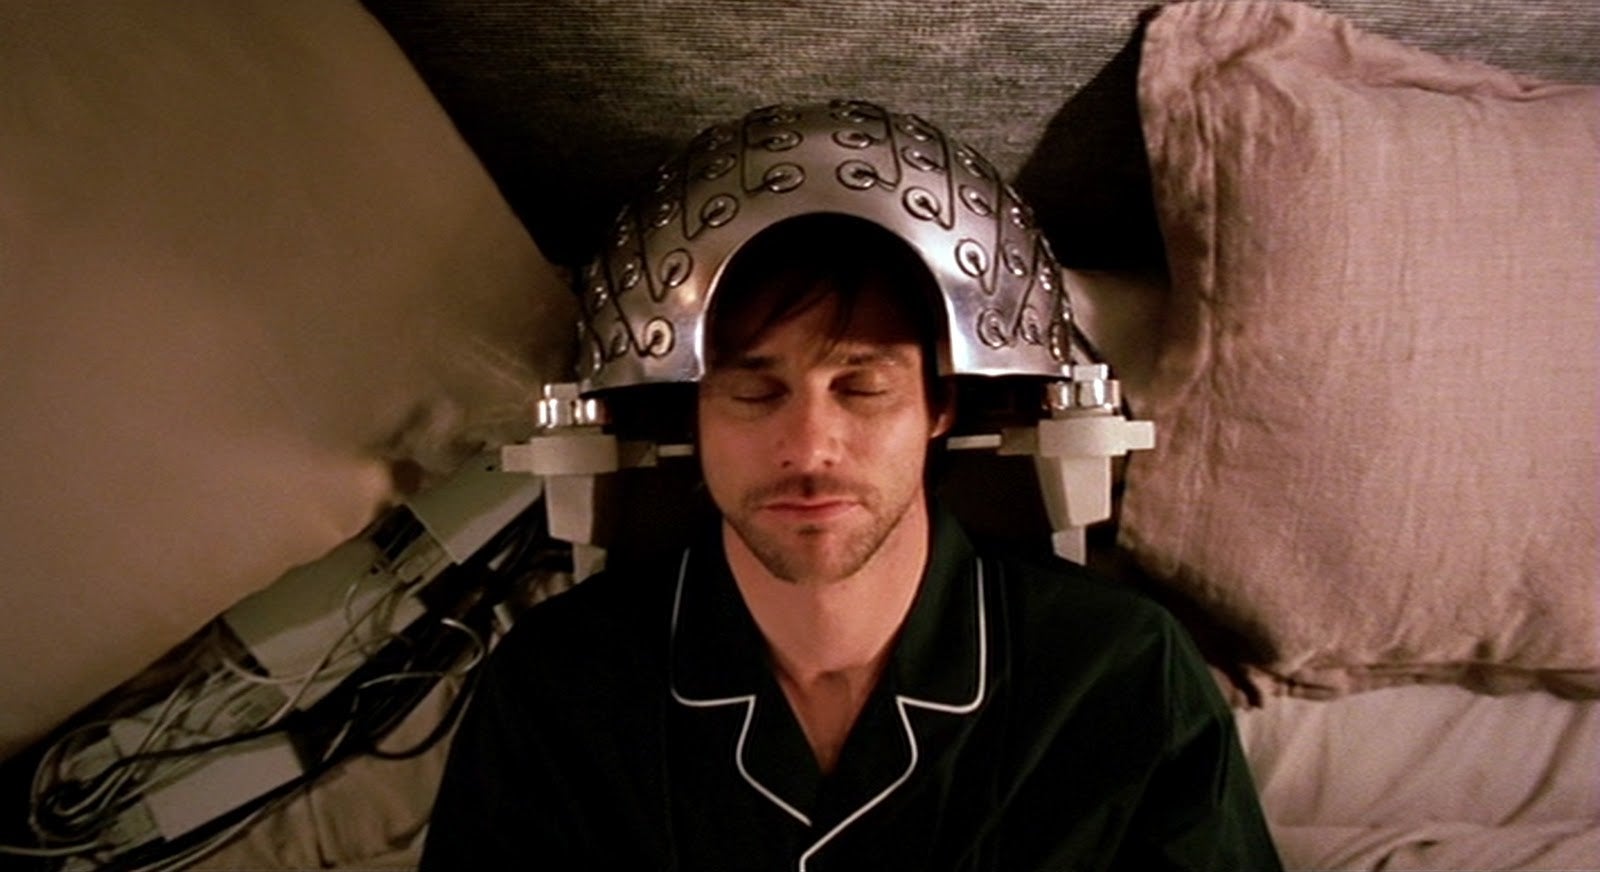 Eternal Sunshine of the Spotless Mind (2004) imagined a world where memories of exes could be erased (Picture: Focus)